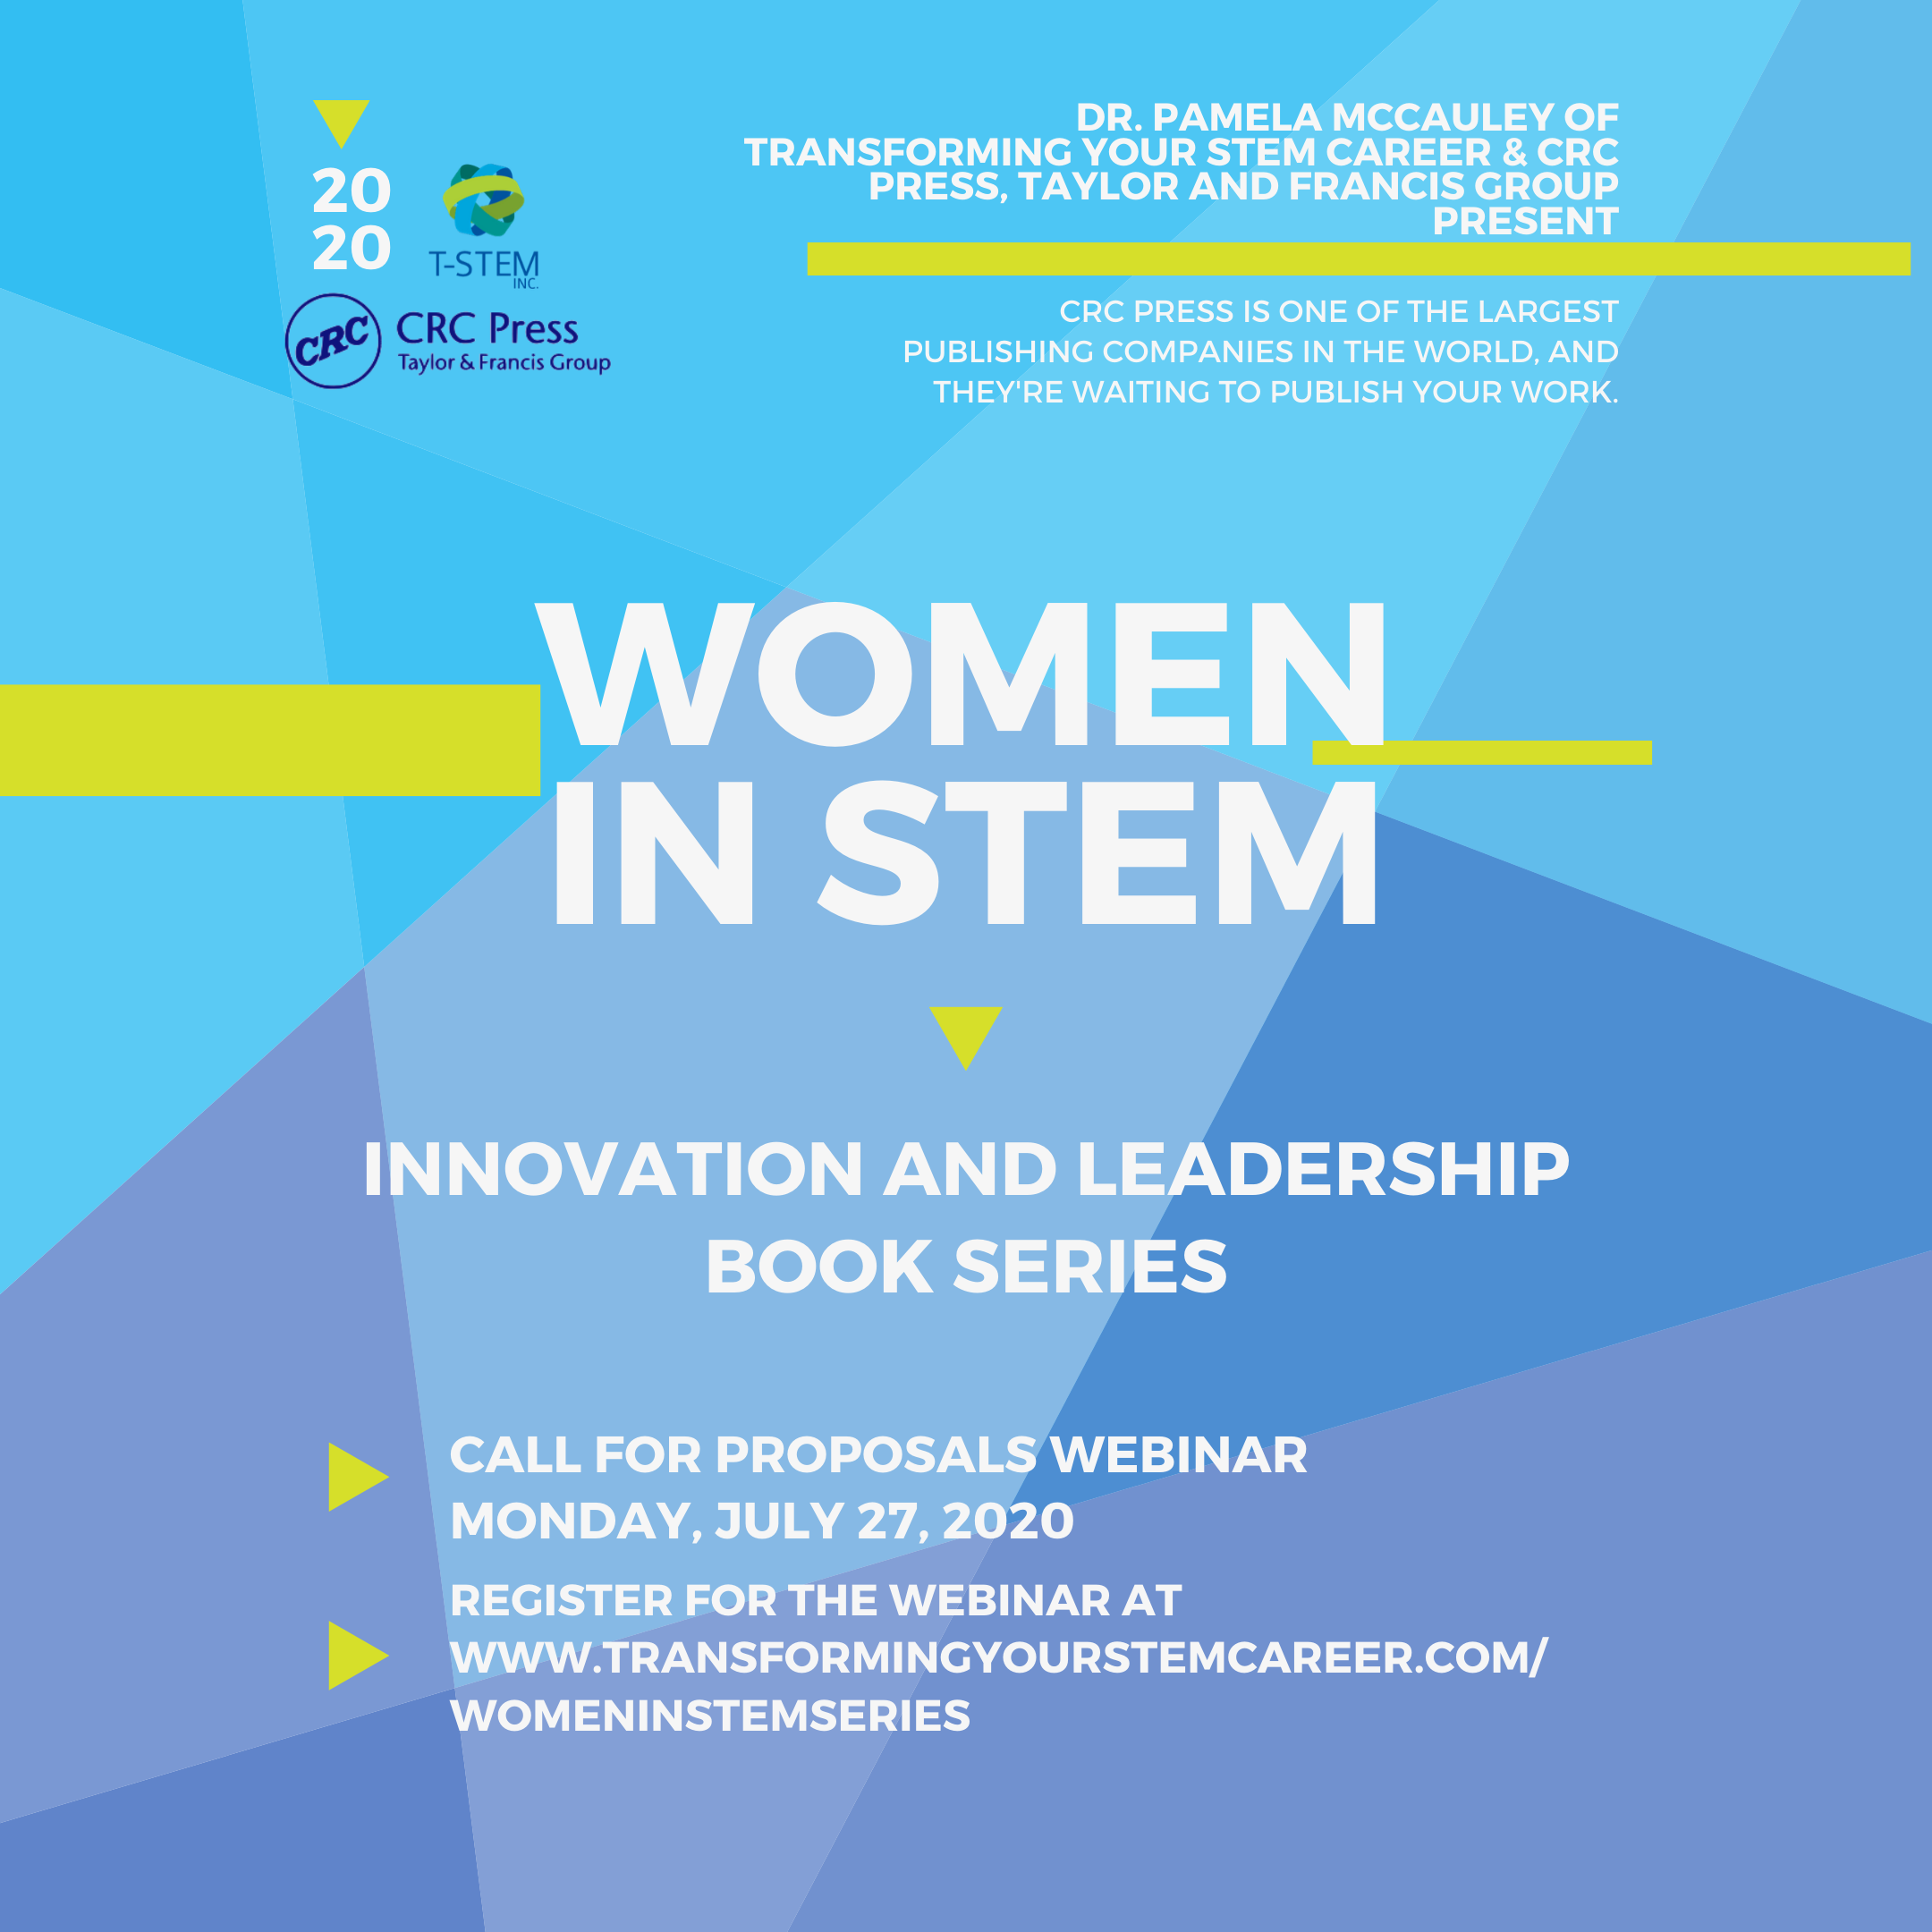 Flyer for Women in STEM Innovation and Leadership Book Series